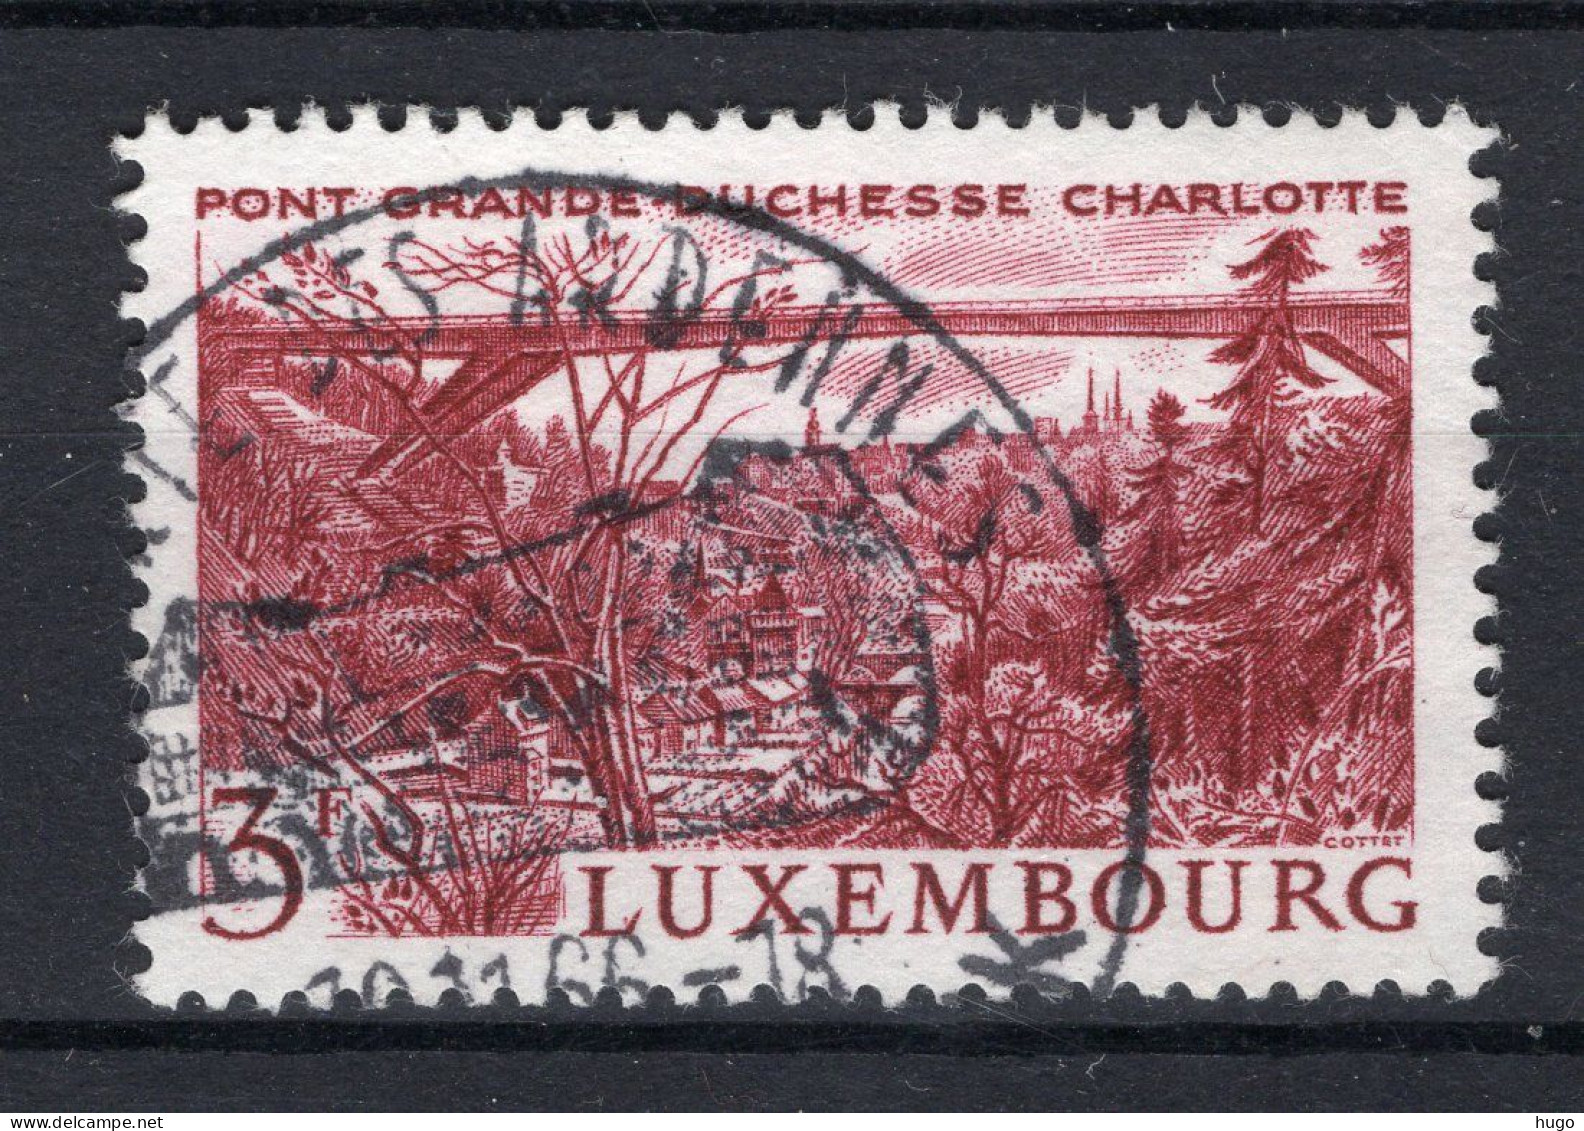 LUXEMBURG Yt. 689° Gestempeld 1966 - Used Stamps